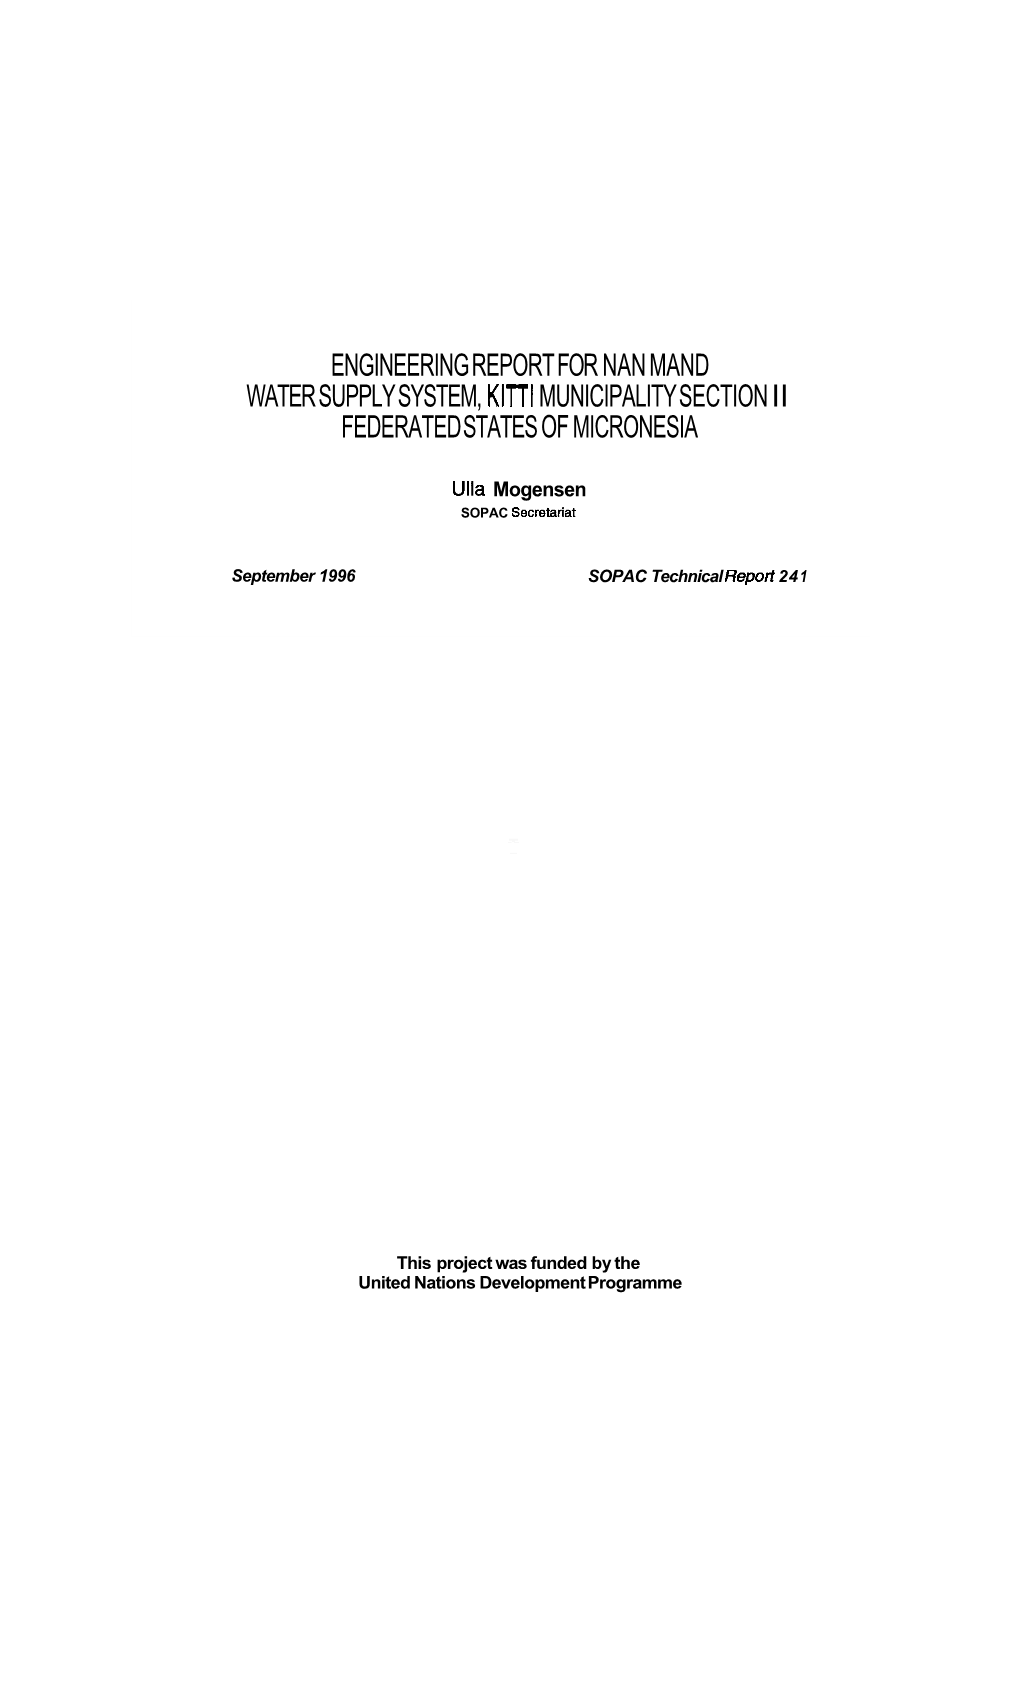 Engineering Report for Nan Mand Water Supply System, Kitti Municipality Section Ii Federated States of Micronesia